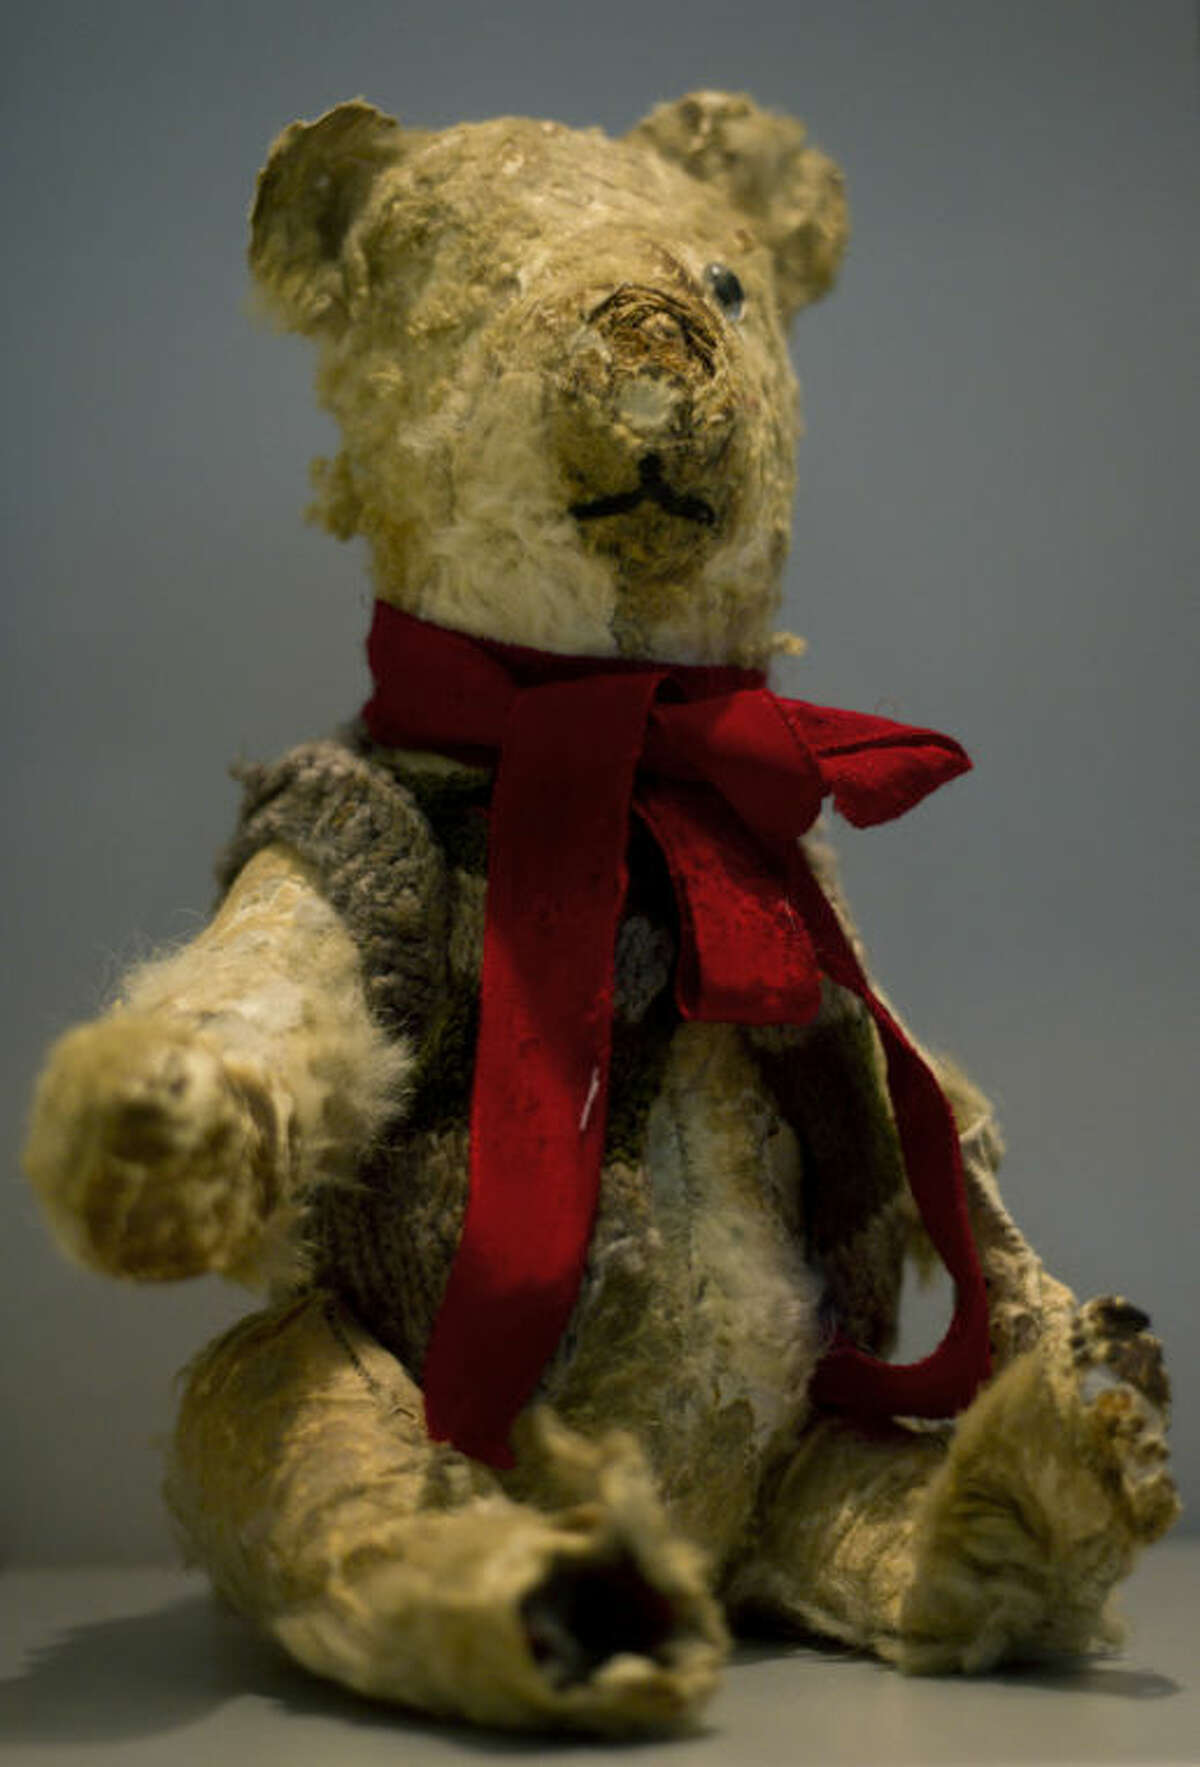 Holocaust survivor Stella Knobel's teddy bear on display at the memorial's "Gathering the Fragments" exhibit at Yad Vashem Holocaust memorial and museum in Jerusalem, Sunday, Jan. 27, 2013., Sunday, Jan. 27, 2013. When Stella Knobel's family had to flee World War II Poland in 1939, the only thing the 7-year-old girl could take with her was her teddy bear. For the next six years, the stuffed animal never left her side as the family wondered through the Soviet Union, to Iran and finally the Holy Land. "He was like family. He was all I had. He knew all my secrets," the 80-year-old now says with a smile. "I saved him all these years. But I worried what would happen to him when I died." So when she heard about a project launched by Israel's national Holocaust memorial and museum to collect artifacts from aging survivors - before they, and their stories, were lost forever - she reluctantly handed over her beloved bear Misiu - Polish for ?“Teddy Bear?”- so the fading memories of the era could be preserved for others. (AP Photo/Ariel Schalit)